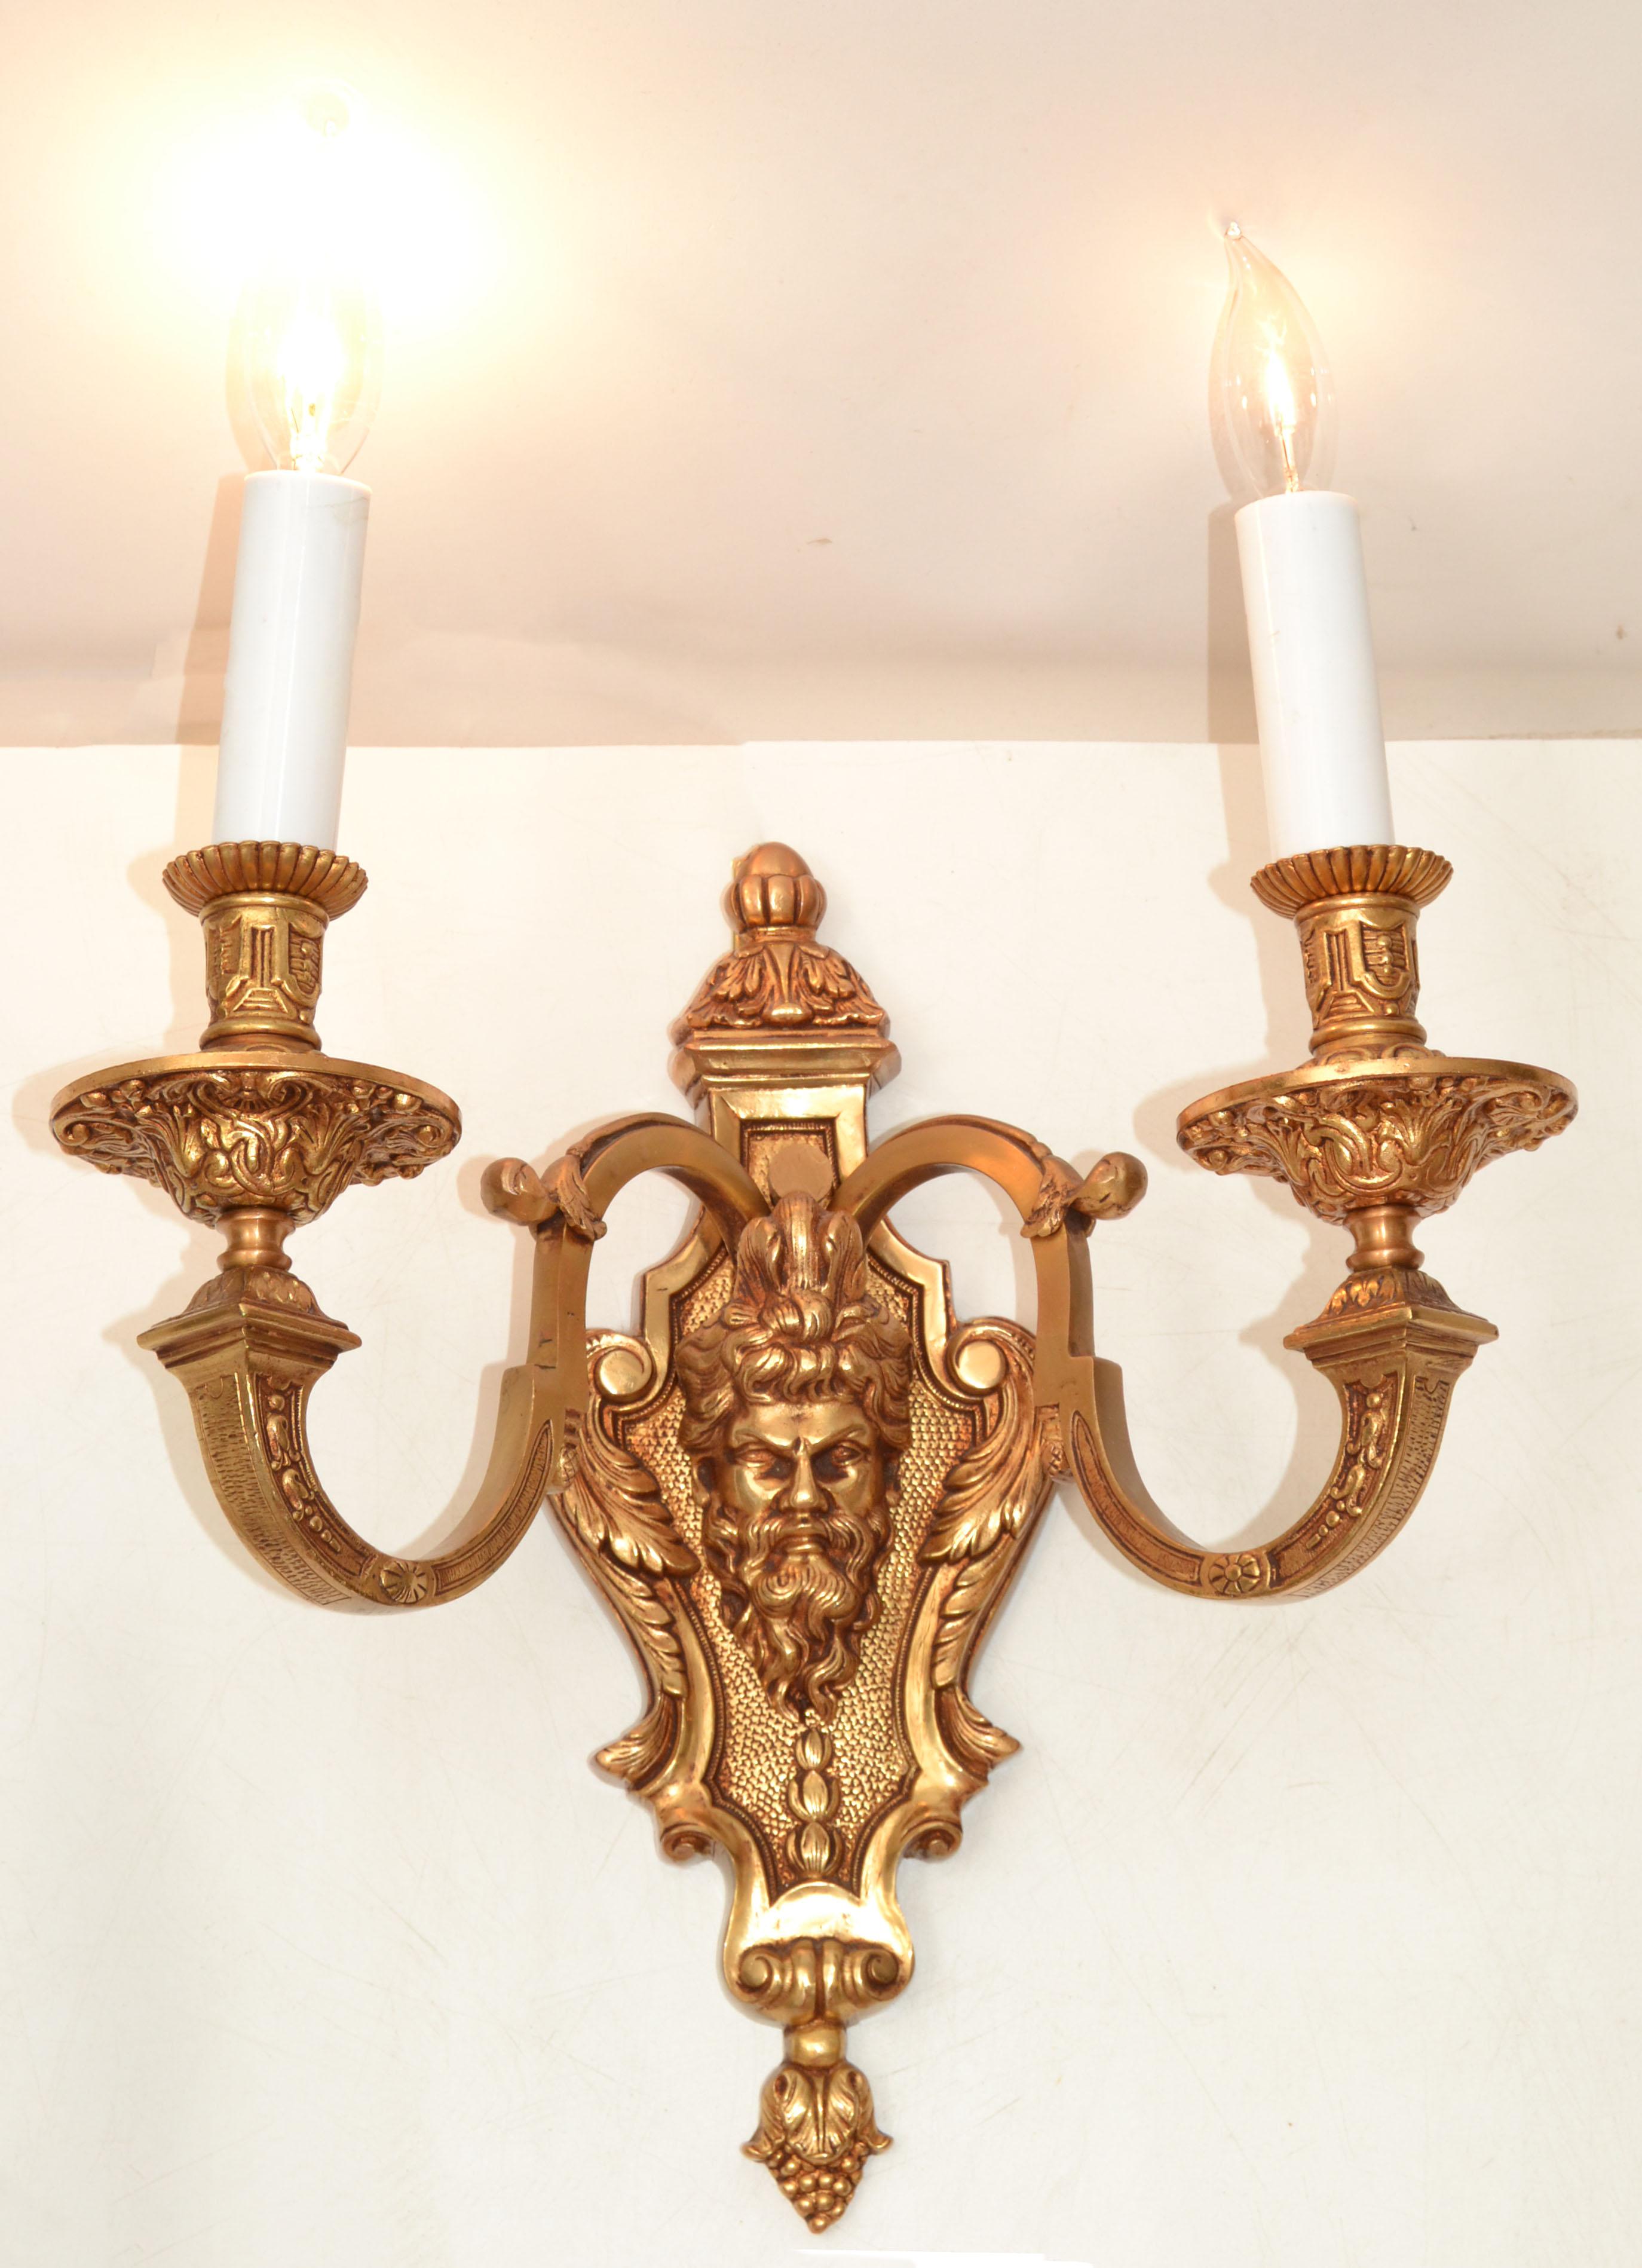 Pair of Second Empire Heavy 2 Light Bronze Sconces Wall Lights Late 19th Century In Good Condition For Sale In Miami, FL